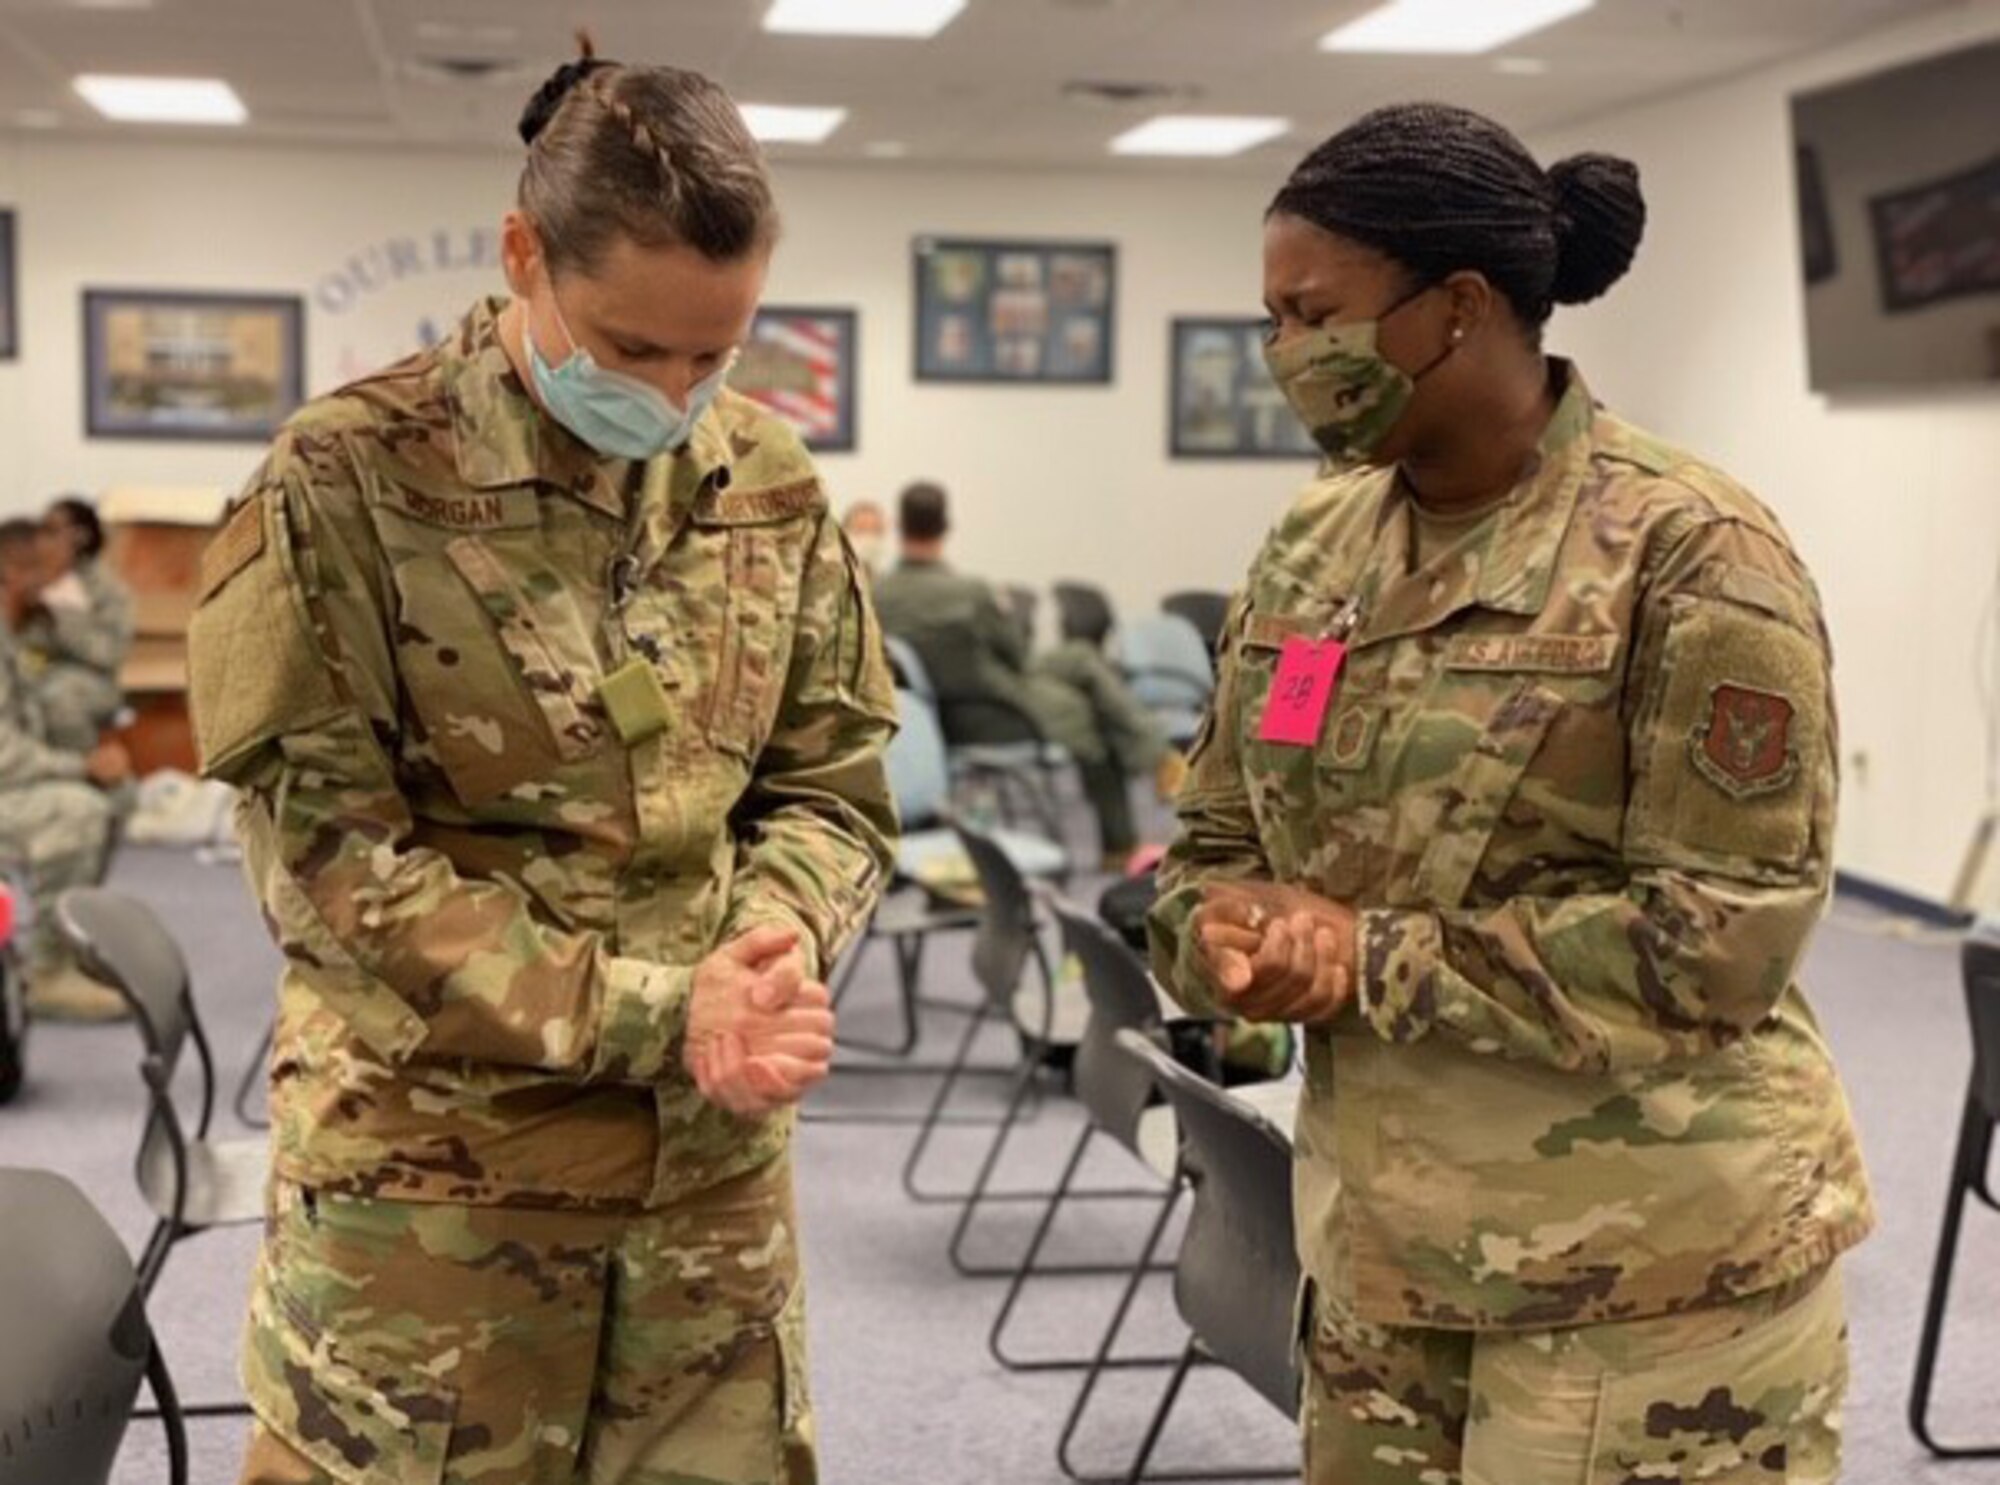 Lt. Col. Kimberly Morgan, 301st Medical Squadron aerospace family nurse practitioner, and Senior Master Sgt. Jonique Young, 301st Fighter Wing Religious Affairs superintendent, take a moment on April 22, 2020, before the former deploys in support of COVID-19 relief efforts from U.S. Naval Air Station Joint Reserve Base, Fort Worth, Texas. This deployment is part of a larger mobilization package of more than 770 Air Force Reservists from across the nation who are taking care of Americans fighting COVID-19. (U.S. Air Force photo by Capt. Jessica Gross)